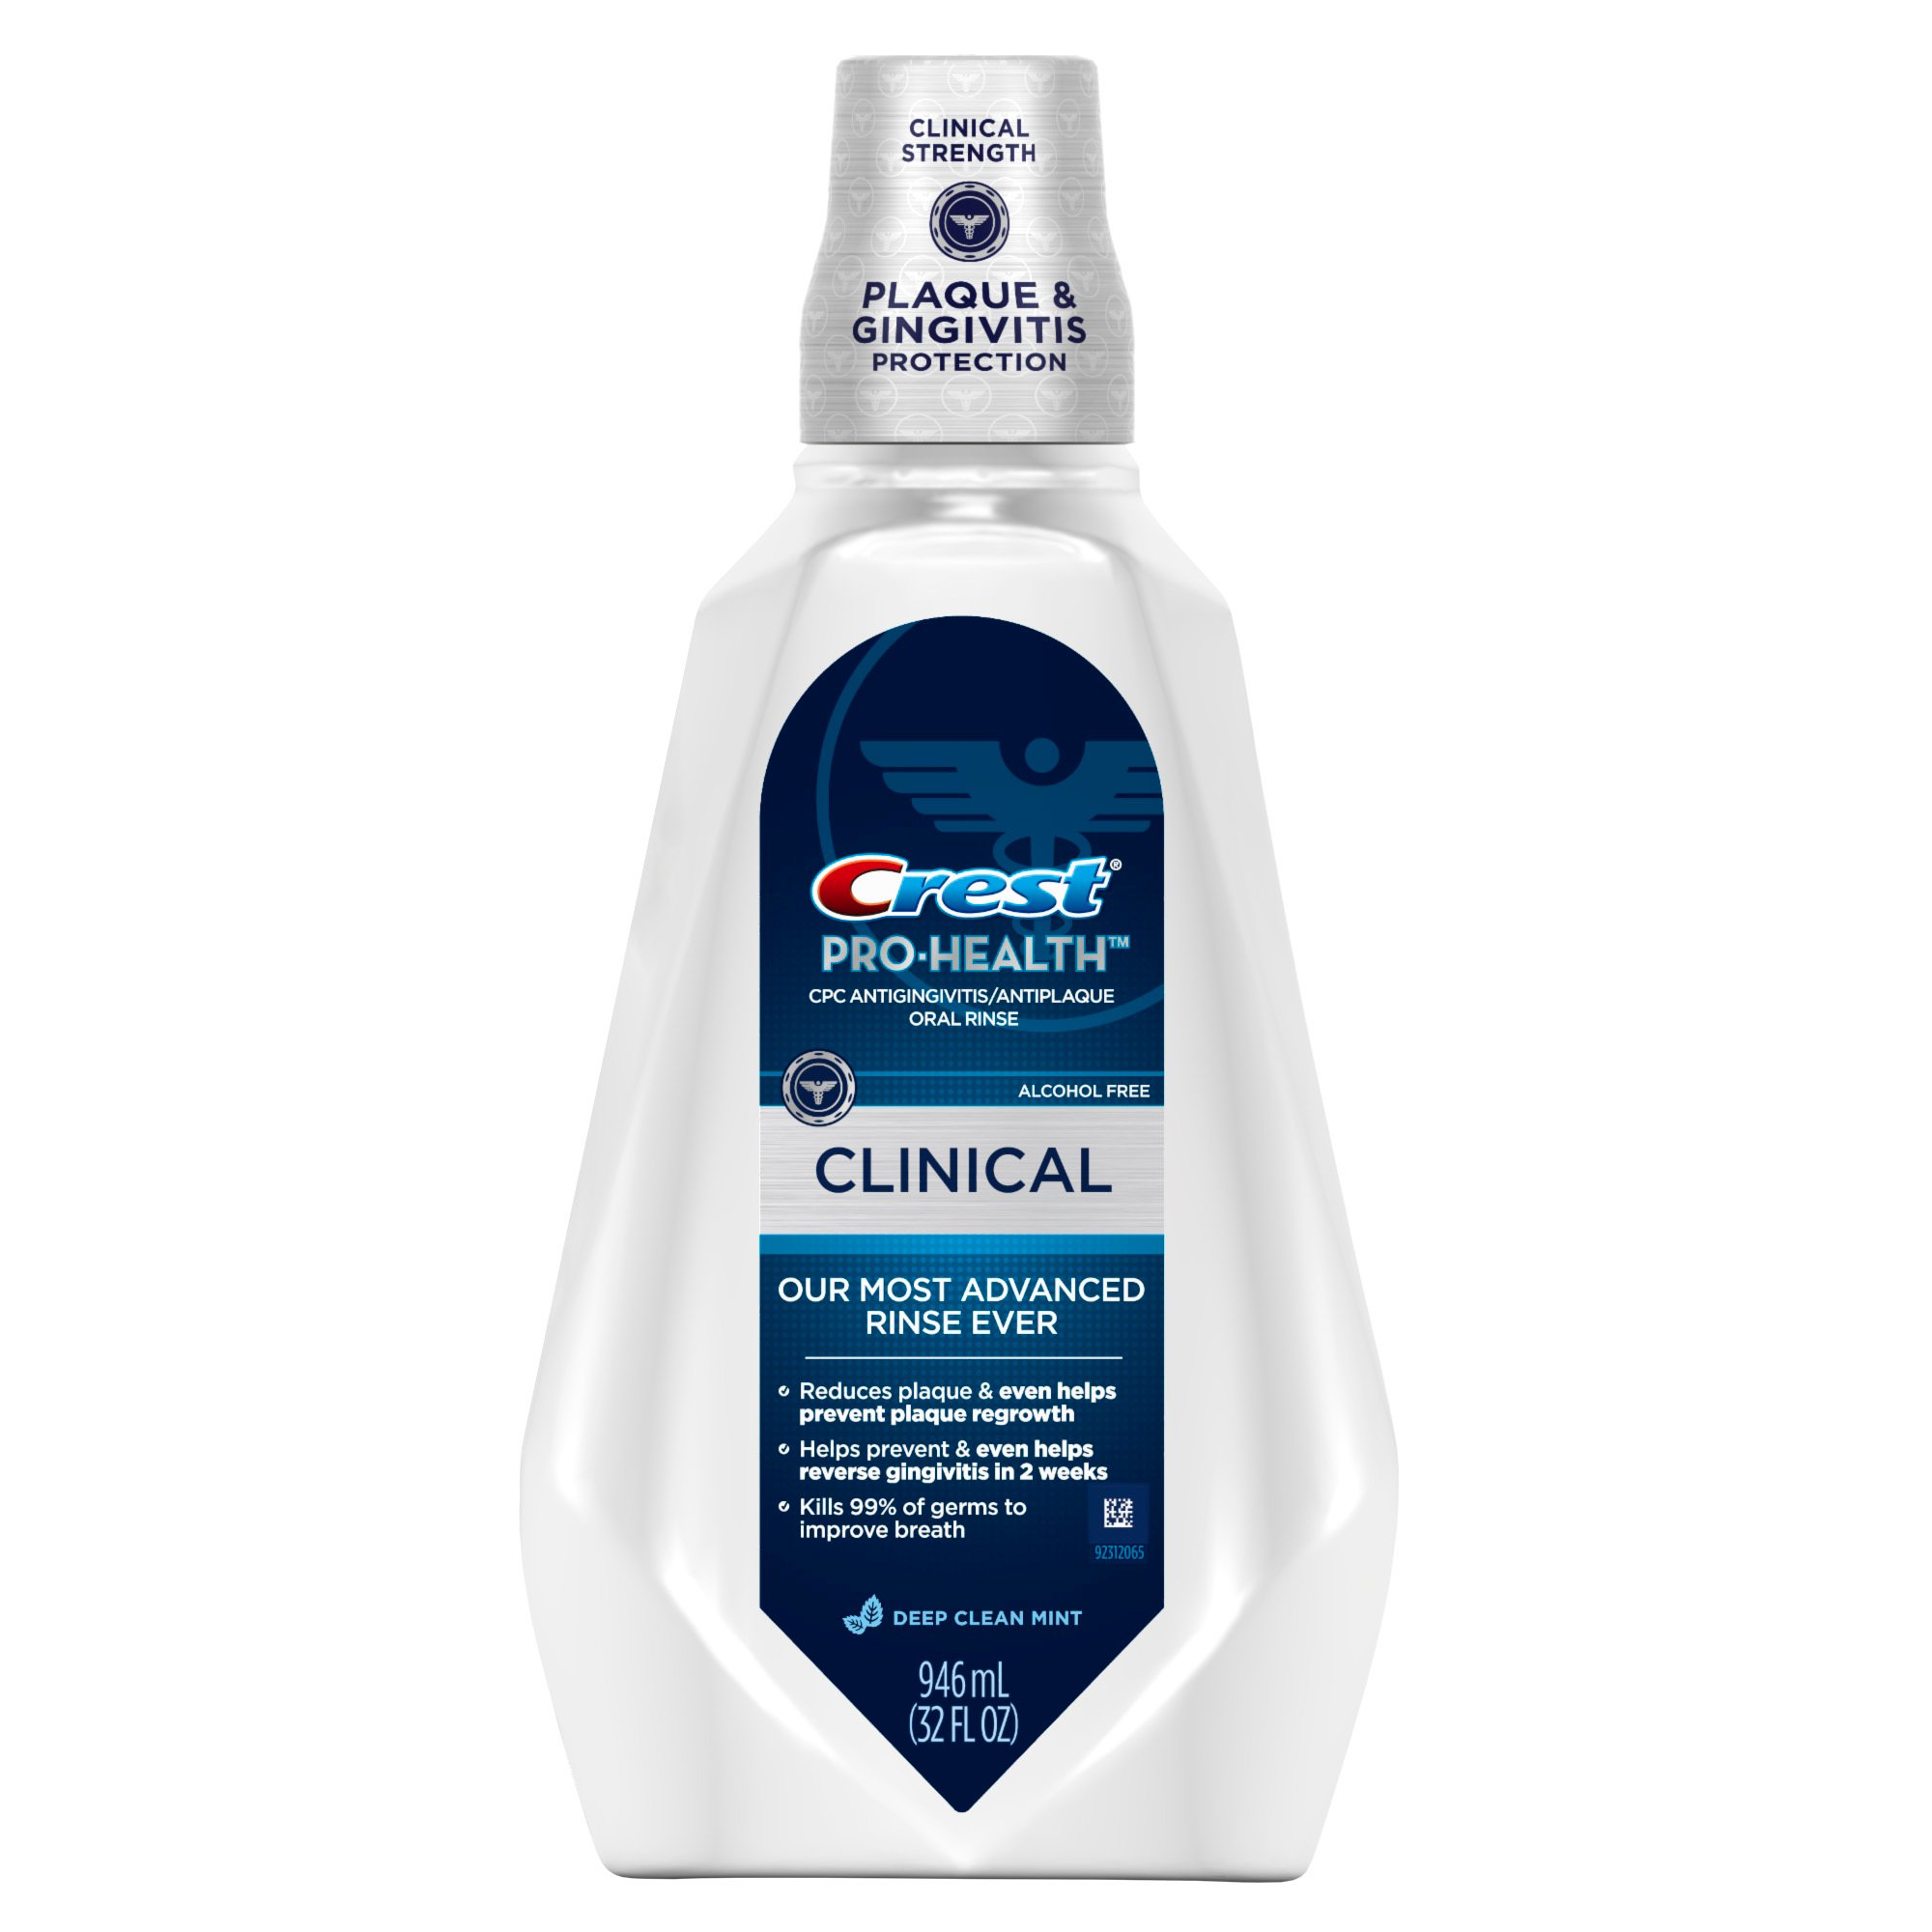 Crest Pro-health Clinical Rinse Alcohol Free Mouthwash - Shop Oral Hygiene At H-e-b